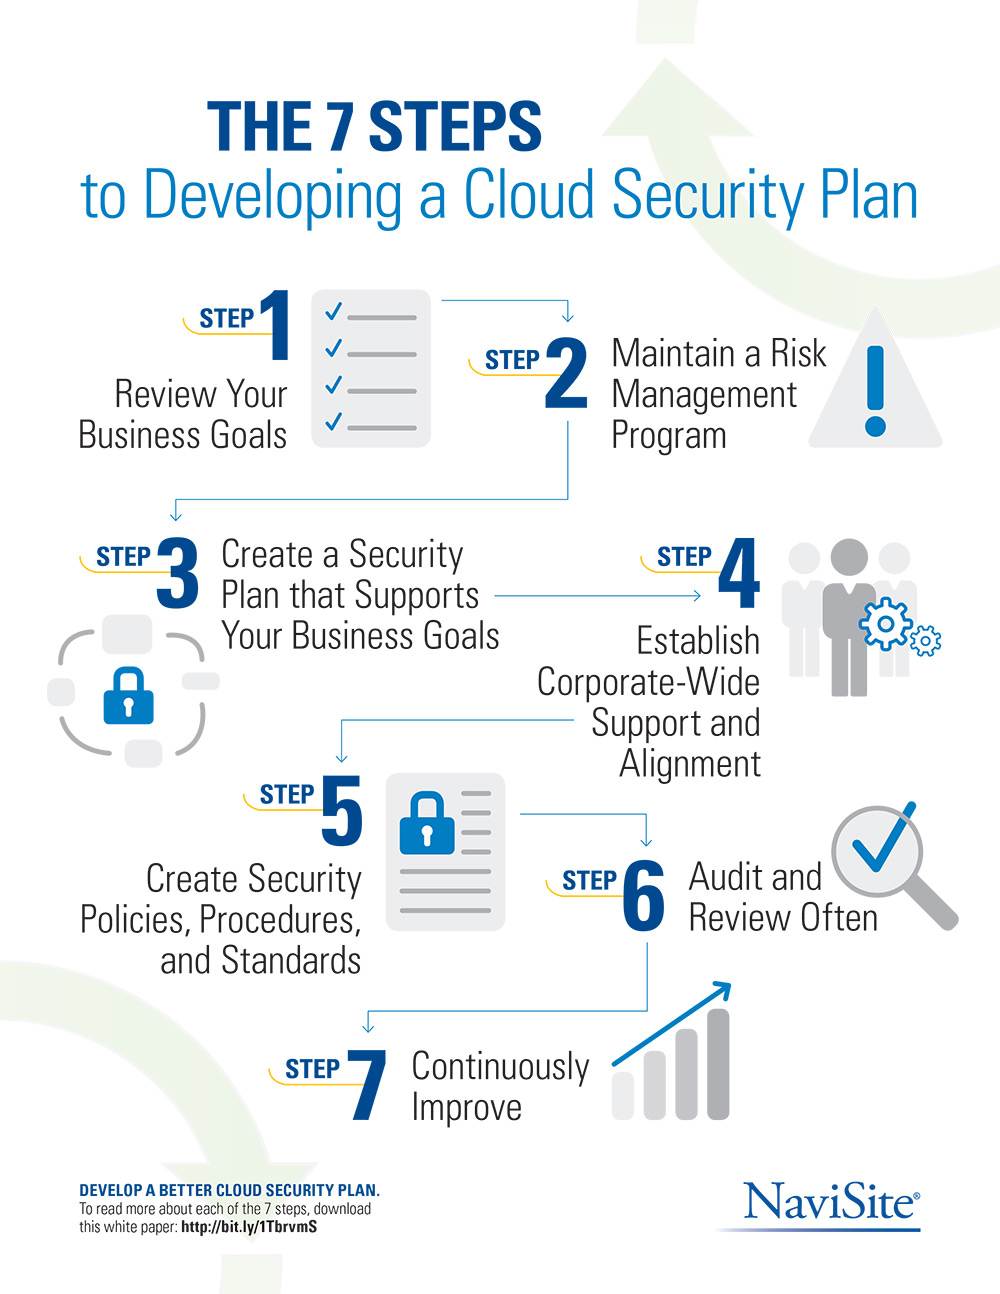 7 Steps to Developing a Cloud Security Plan